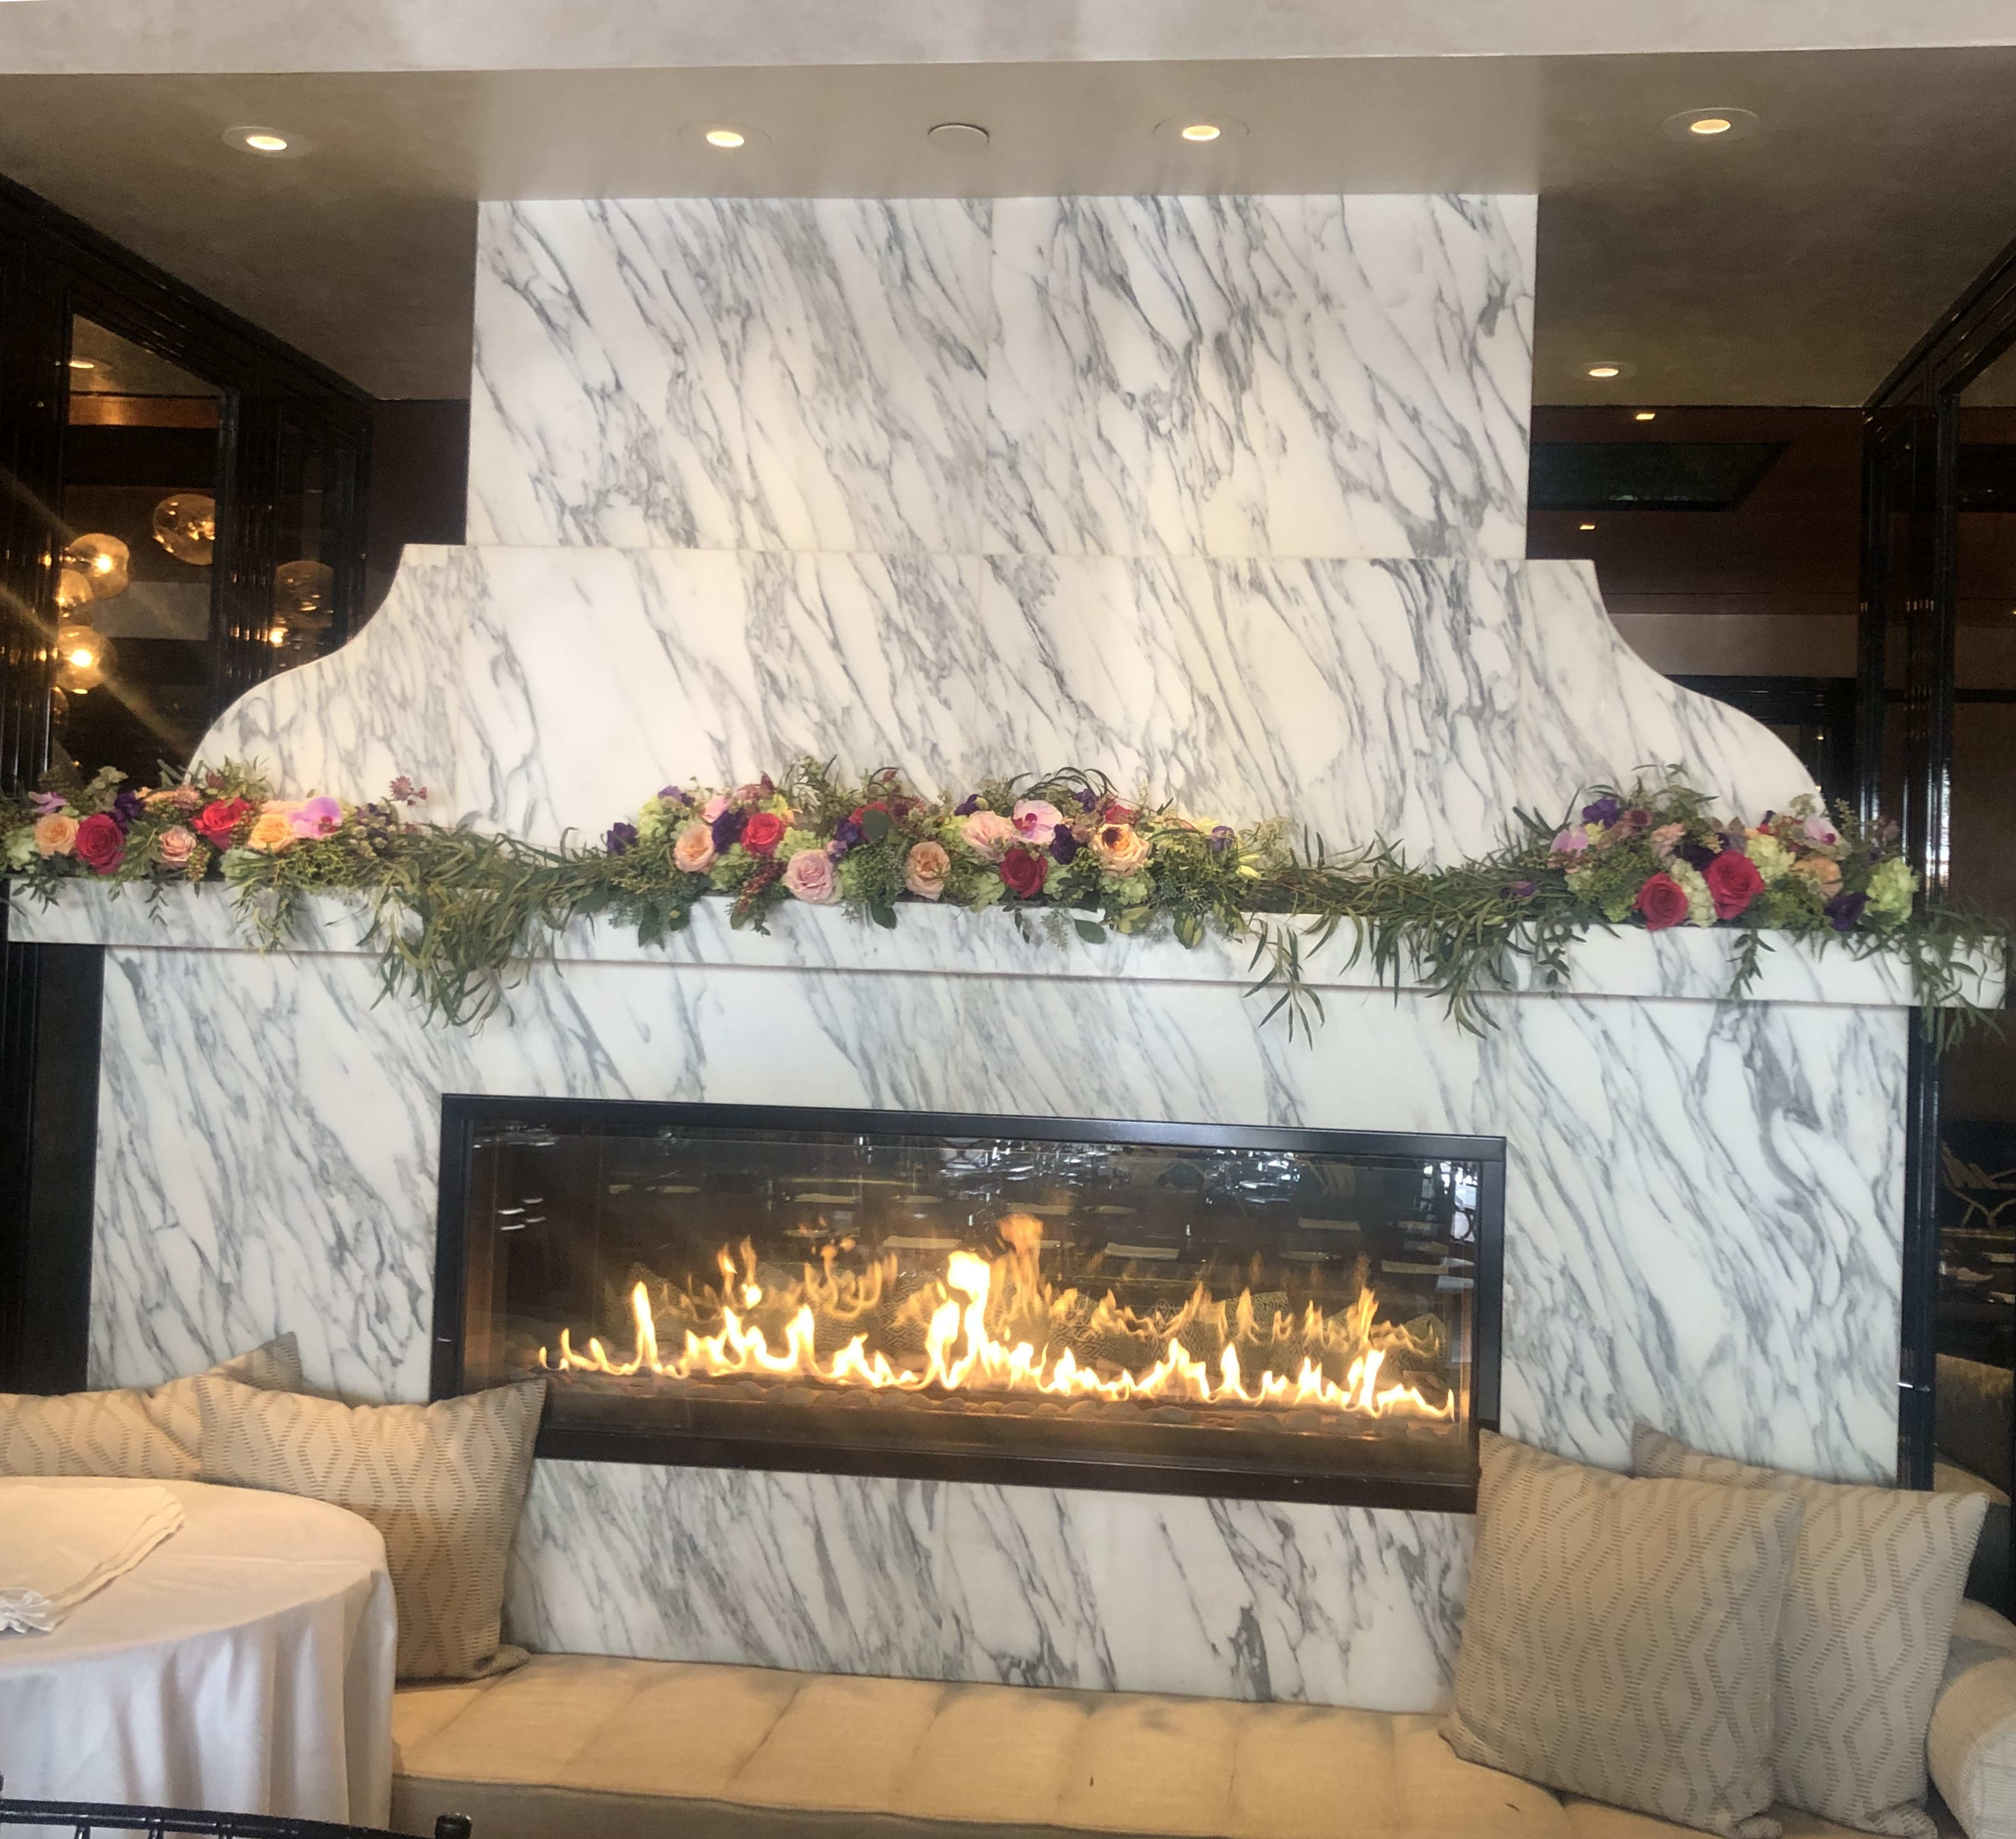  Fireplace #FP1 - Bel Air hotel fireplace decoration to match the rest of the flowers  garden look garland